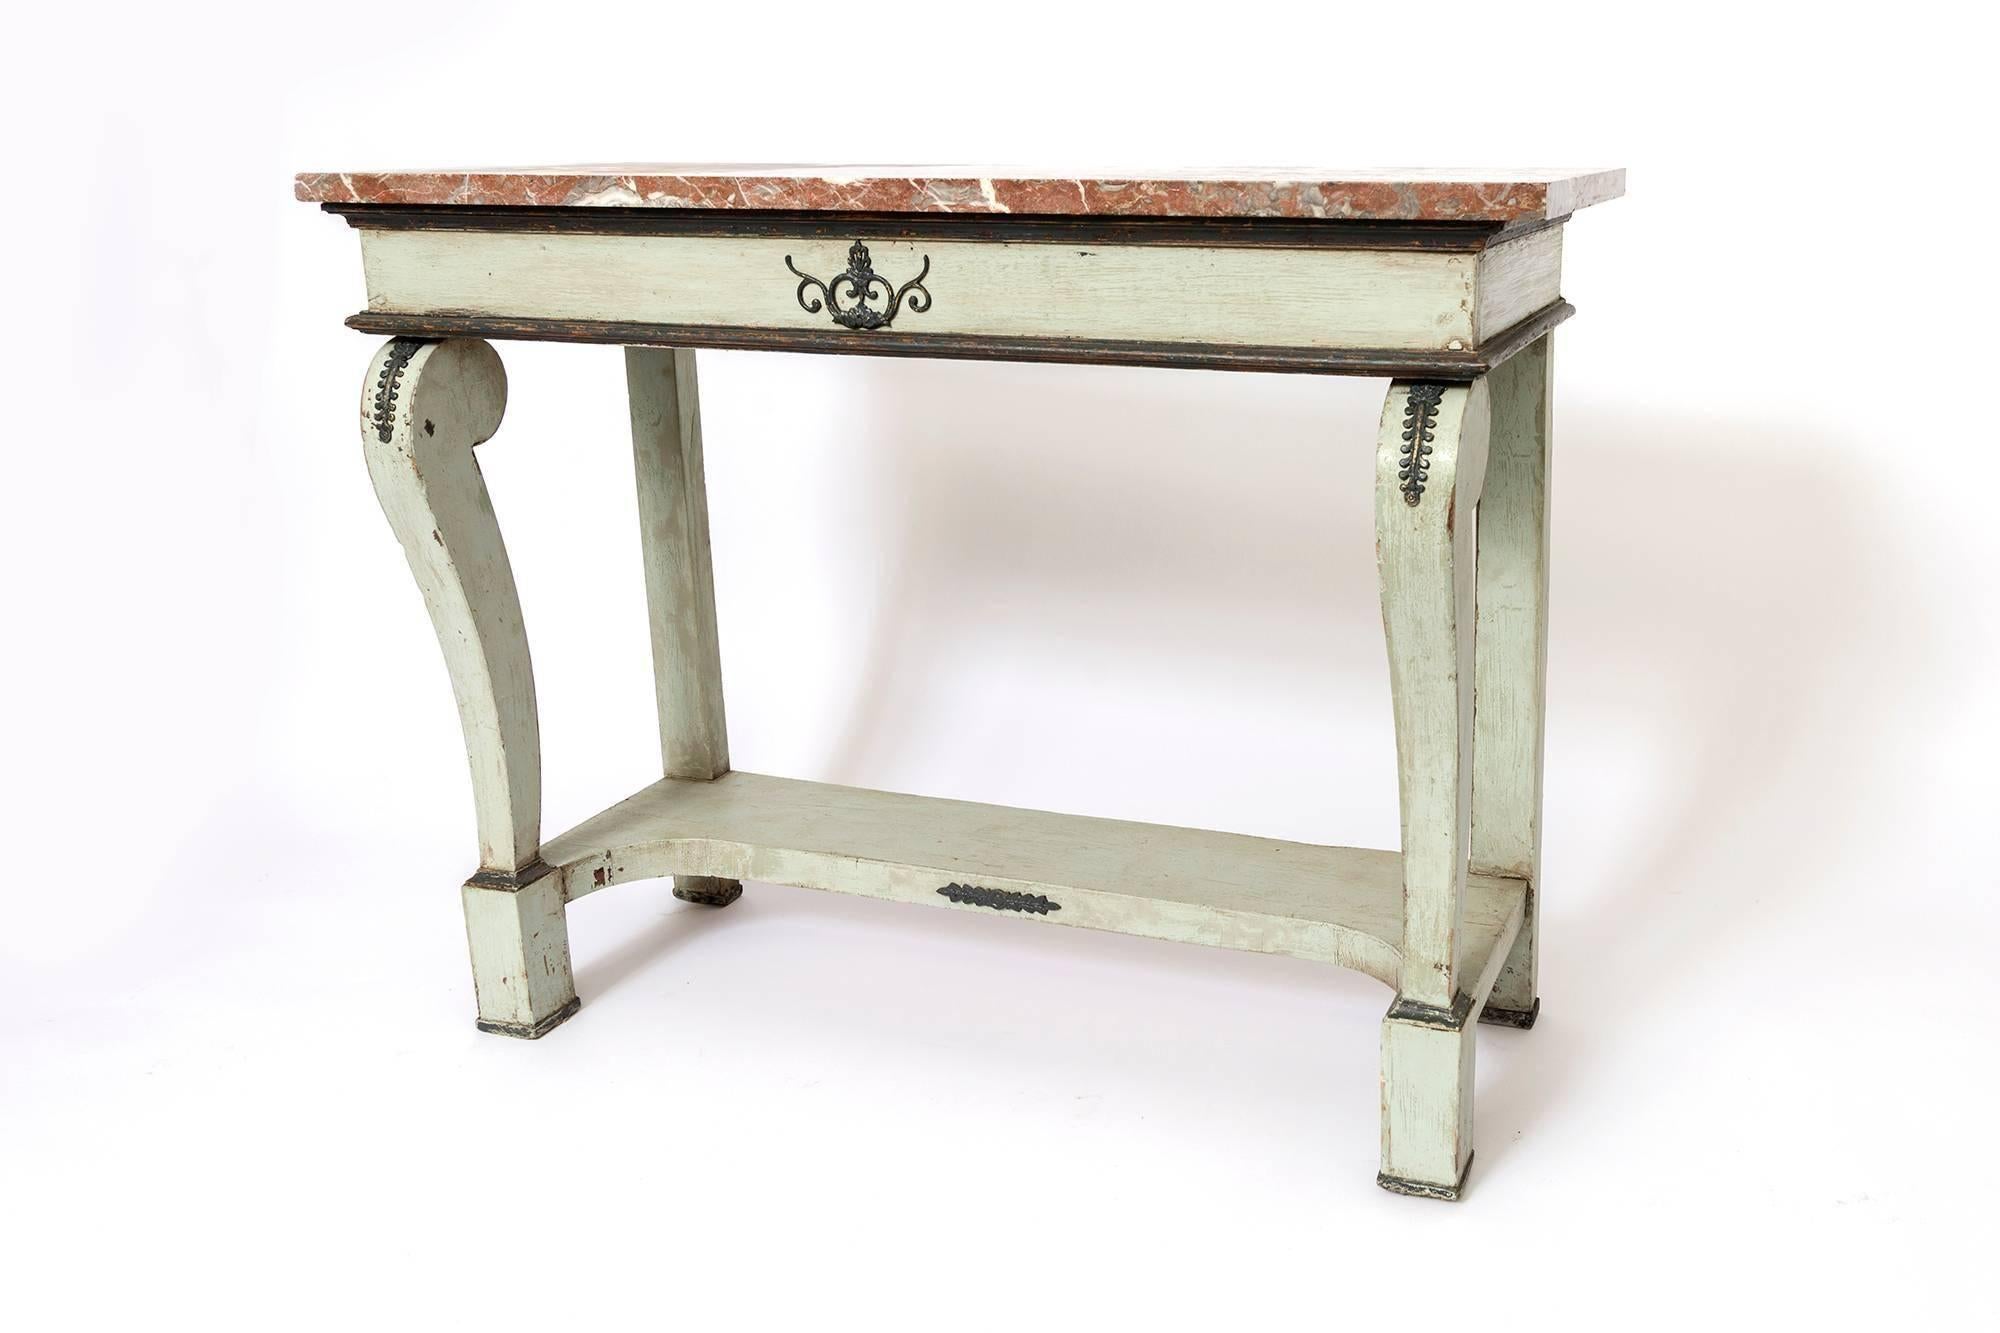 A beautiful pair of carved French console tables in a light greenish grey with marble tops. Stud details and black painted trim.